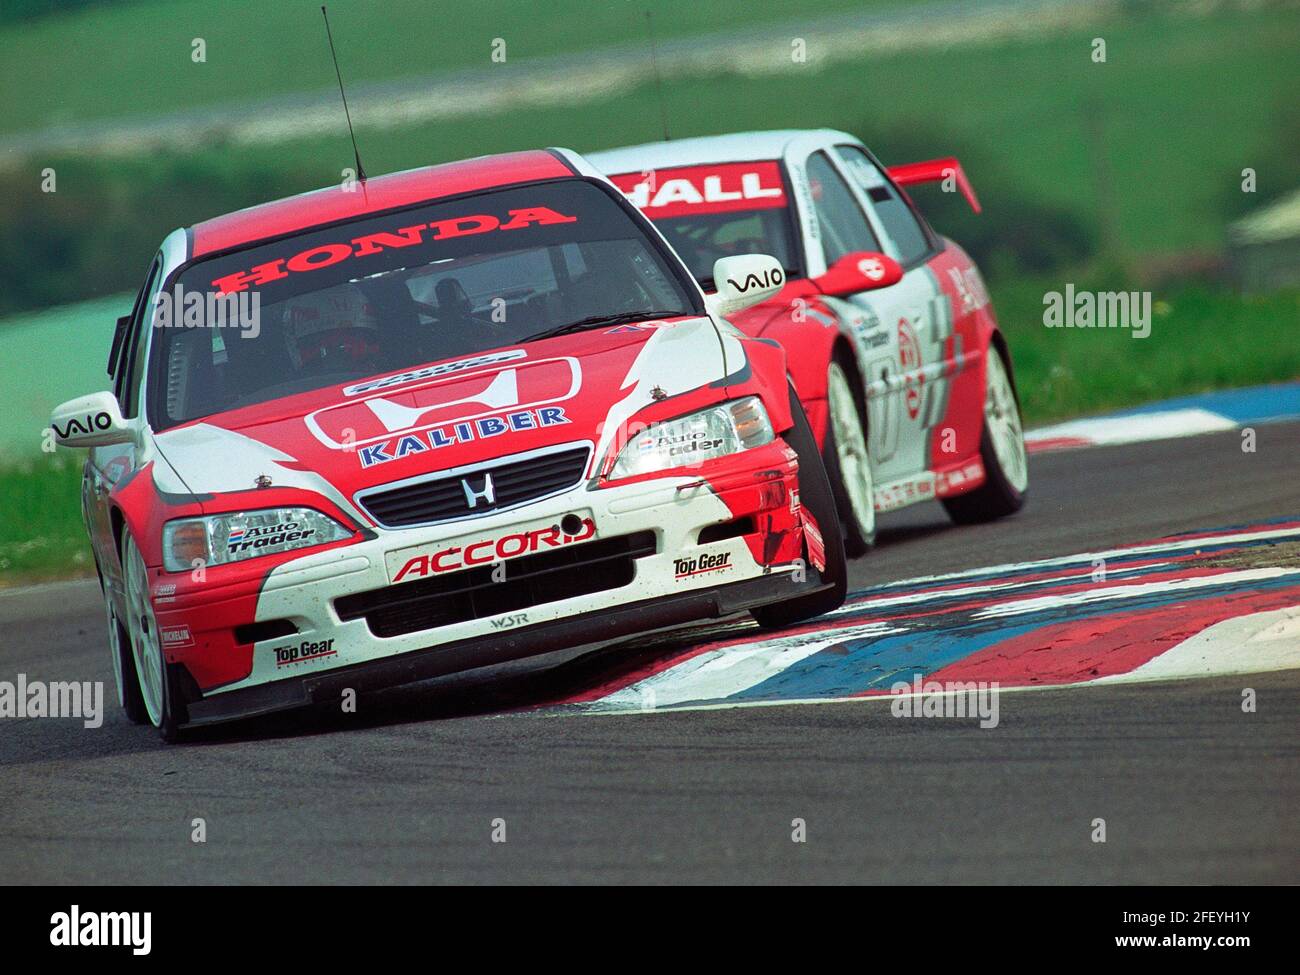 Honda Accord in rounds 5 and 6 in the BTCC championship at Thruxton Circuit in 1999 Stock Photo